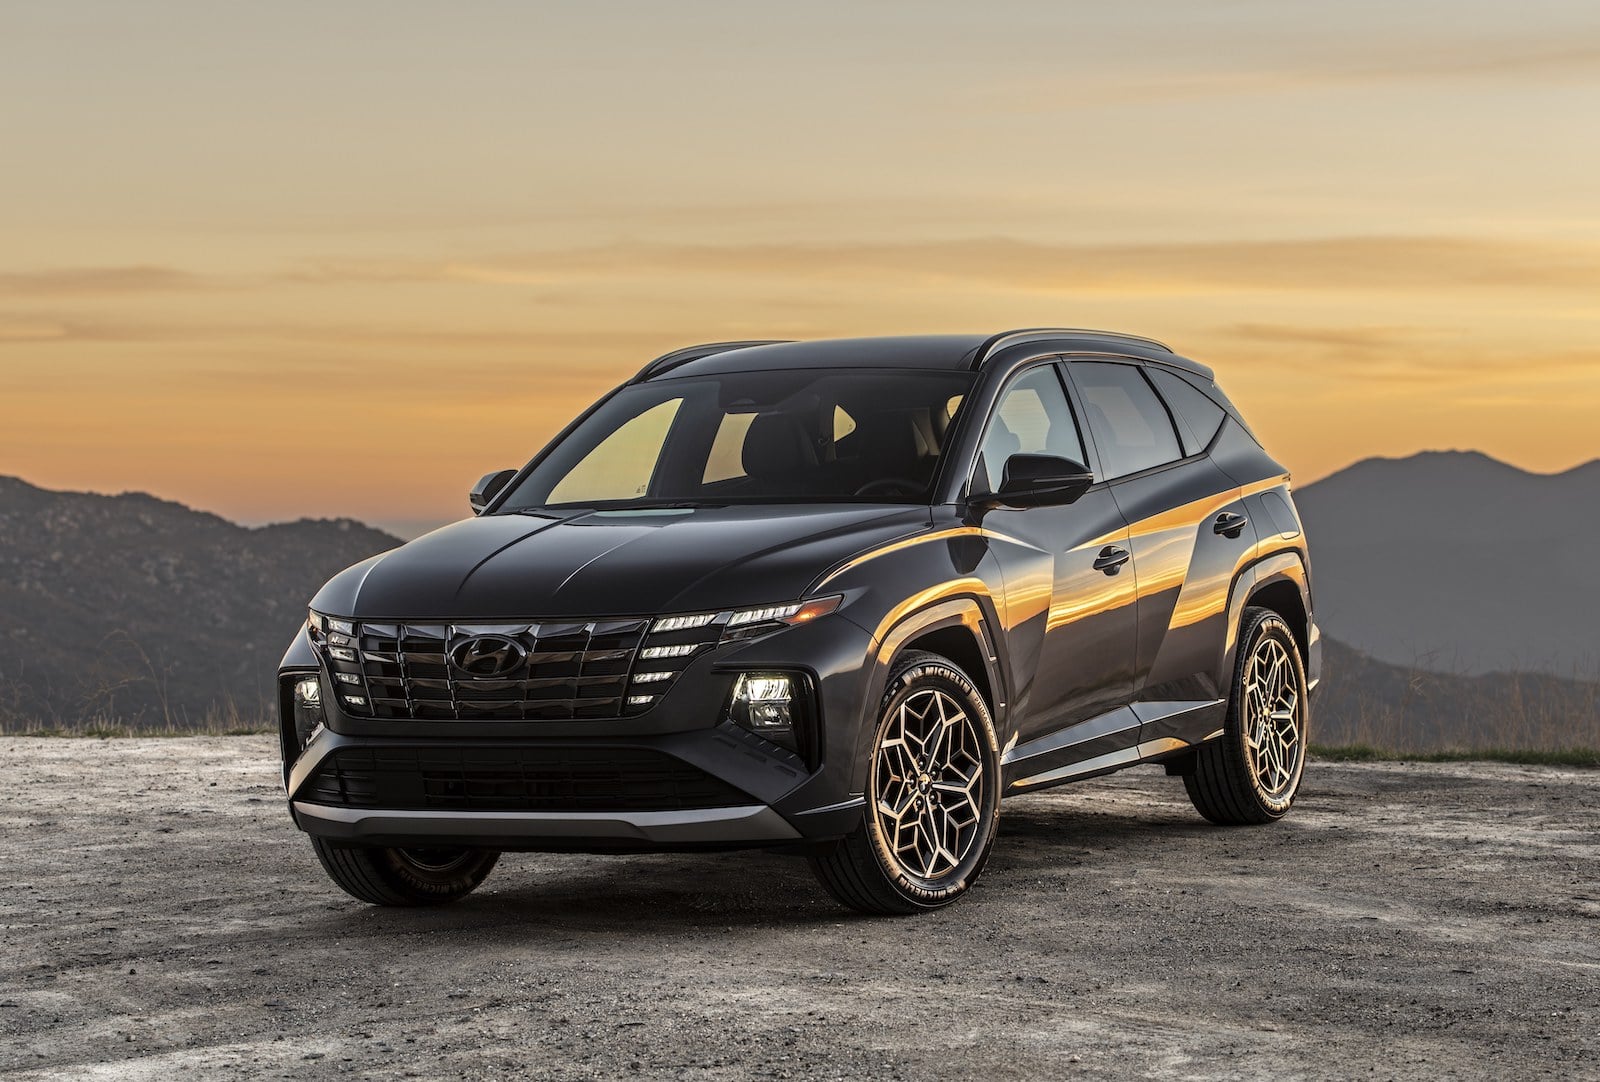 Hyundai Adds Tucson to 2022 Performance Vehicle Line-up - The Detroit ...